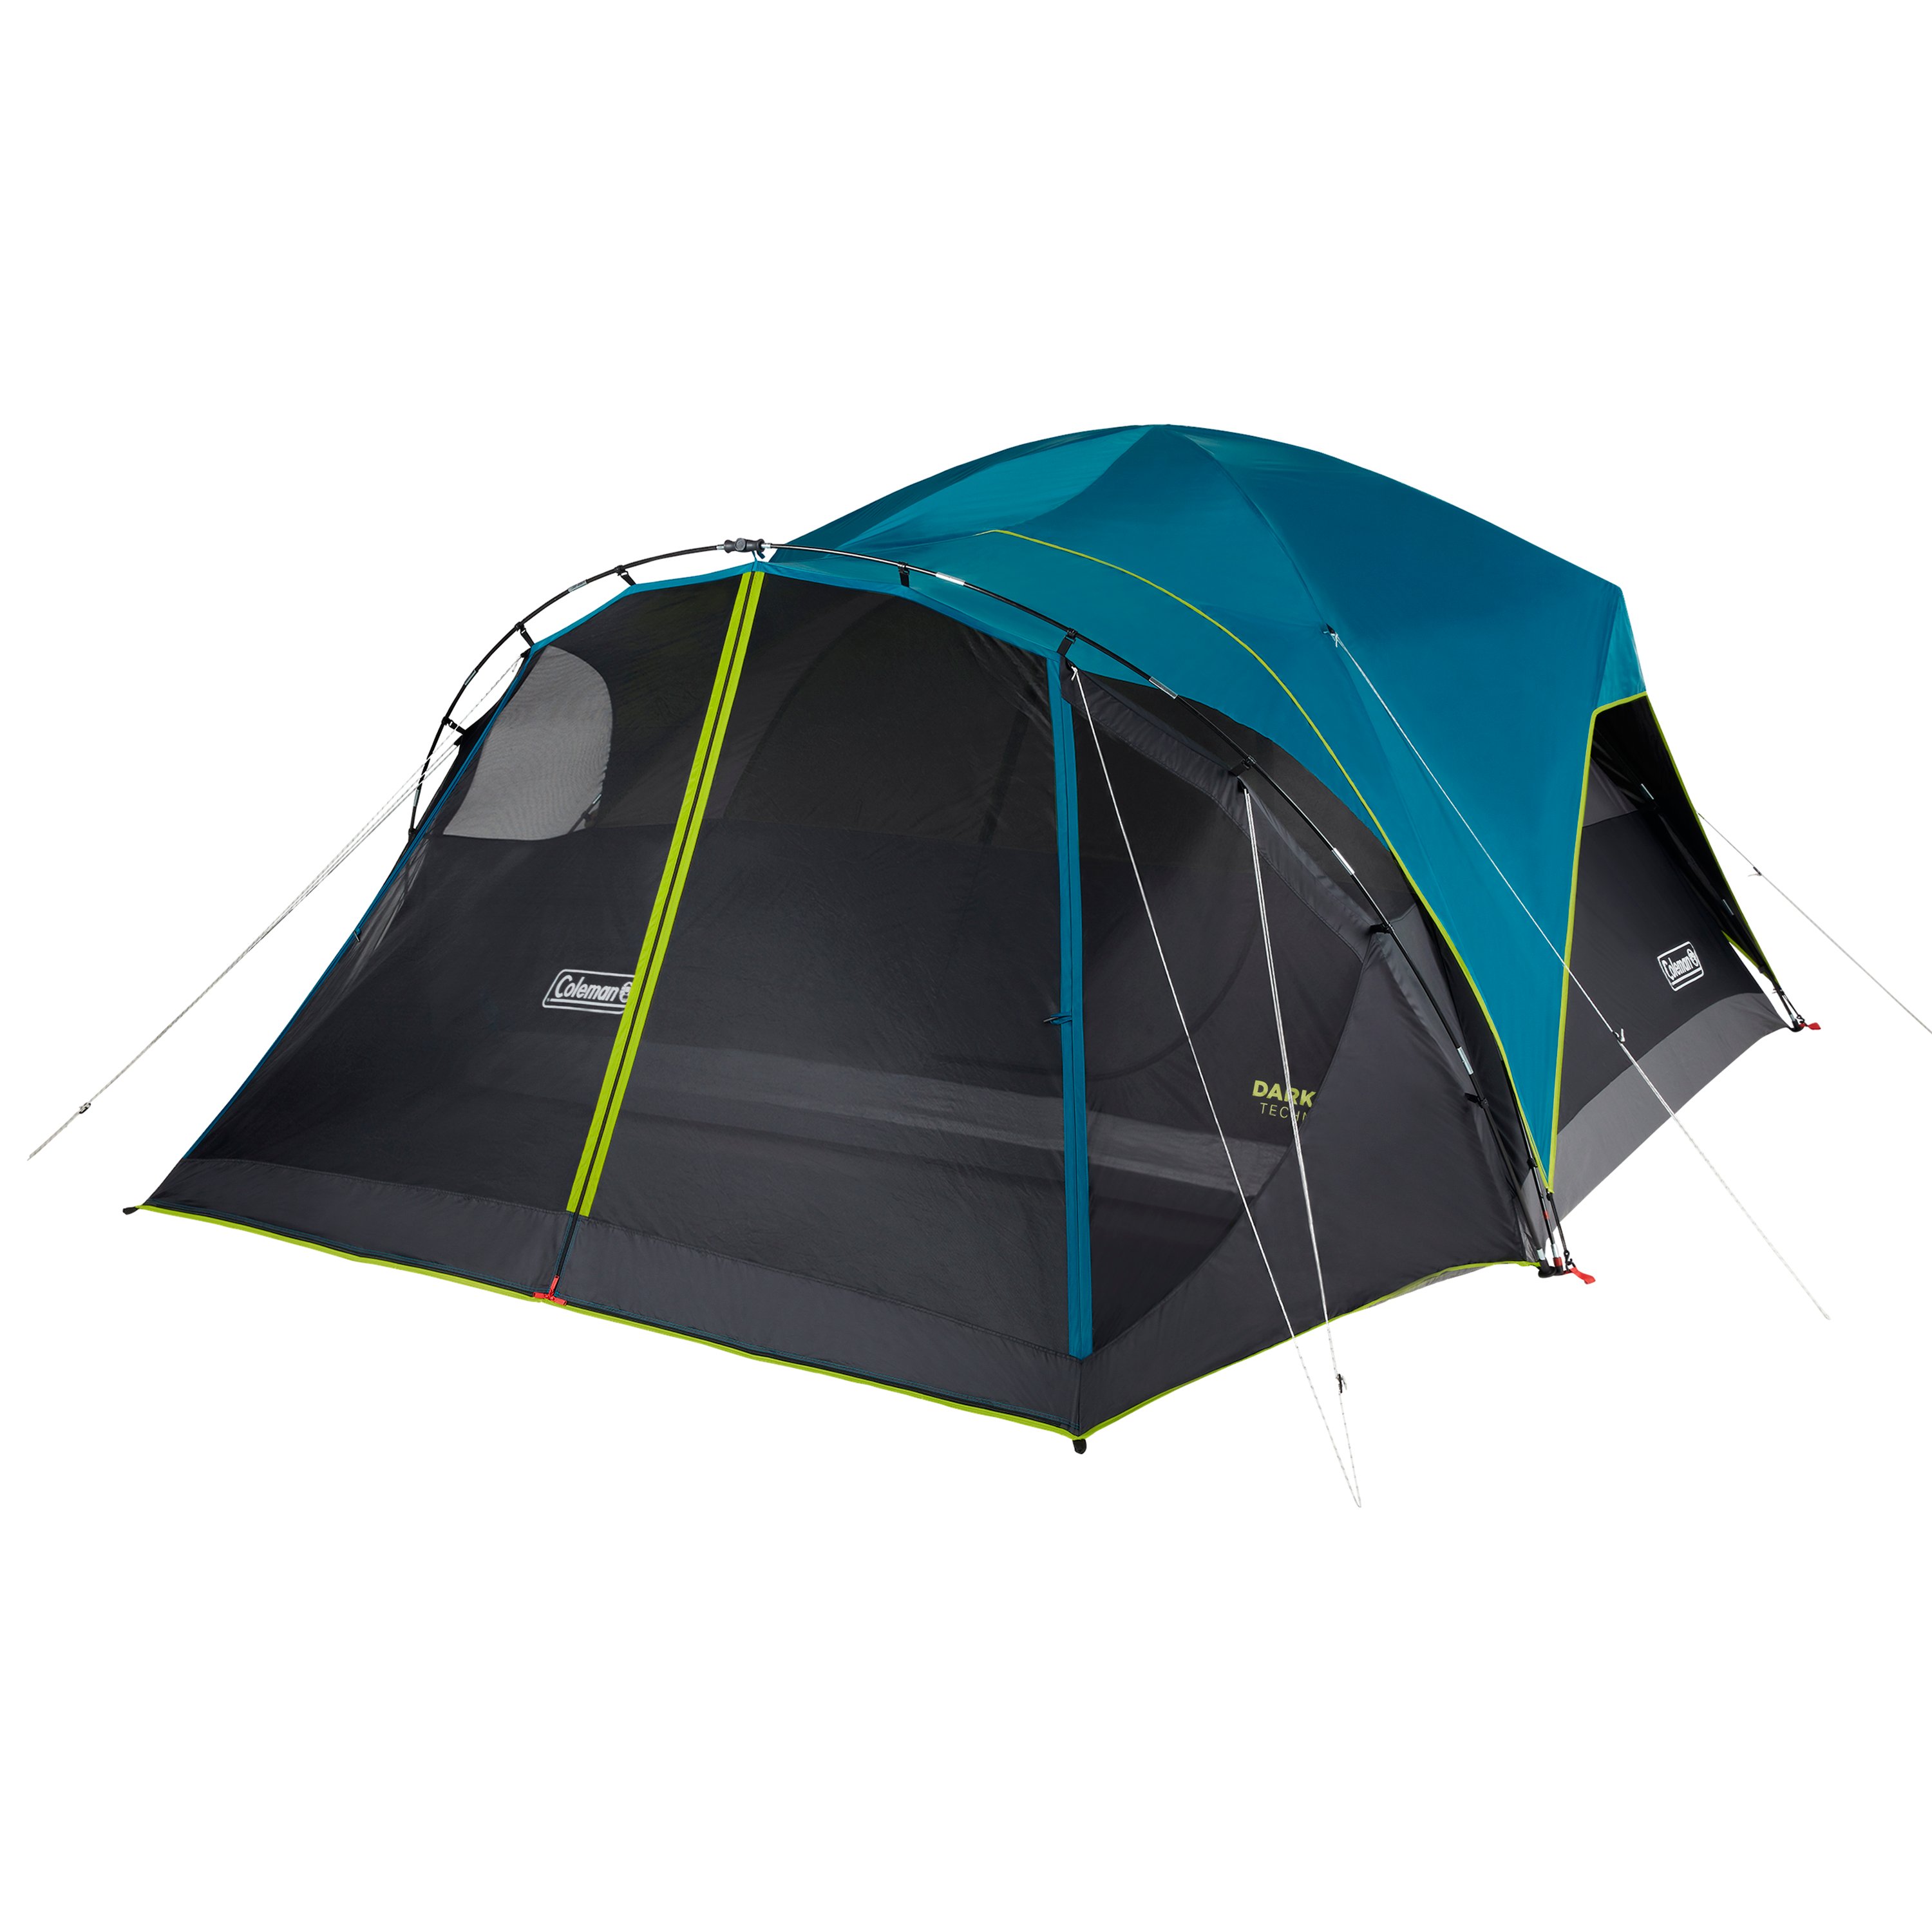 Coleman Carlsbad 8-Person Dark Room Dome Tent - image 1 of 9